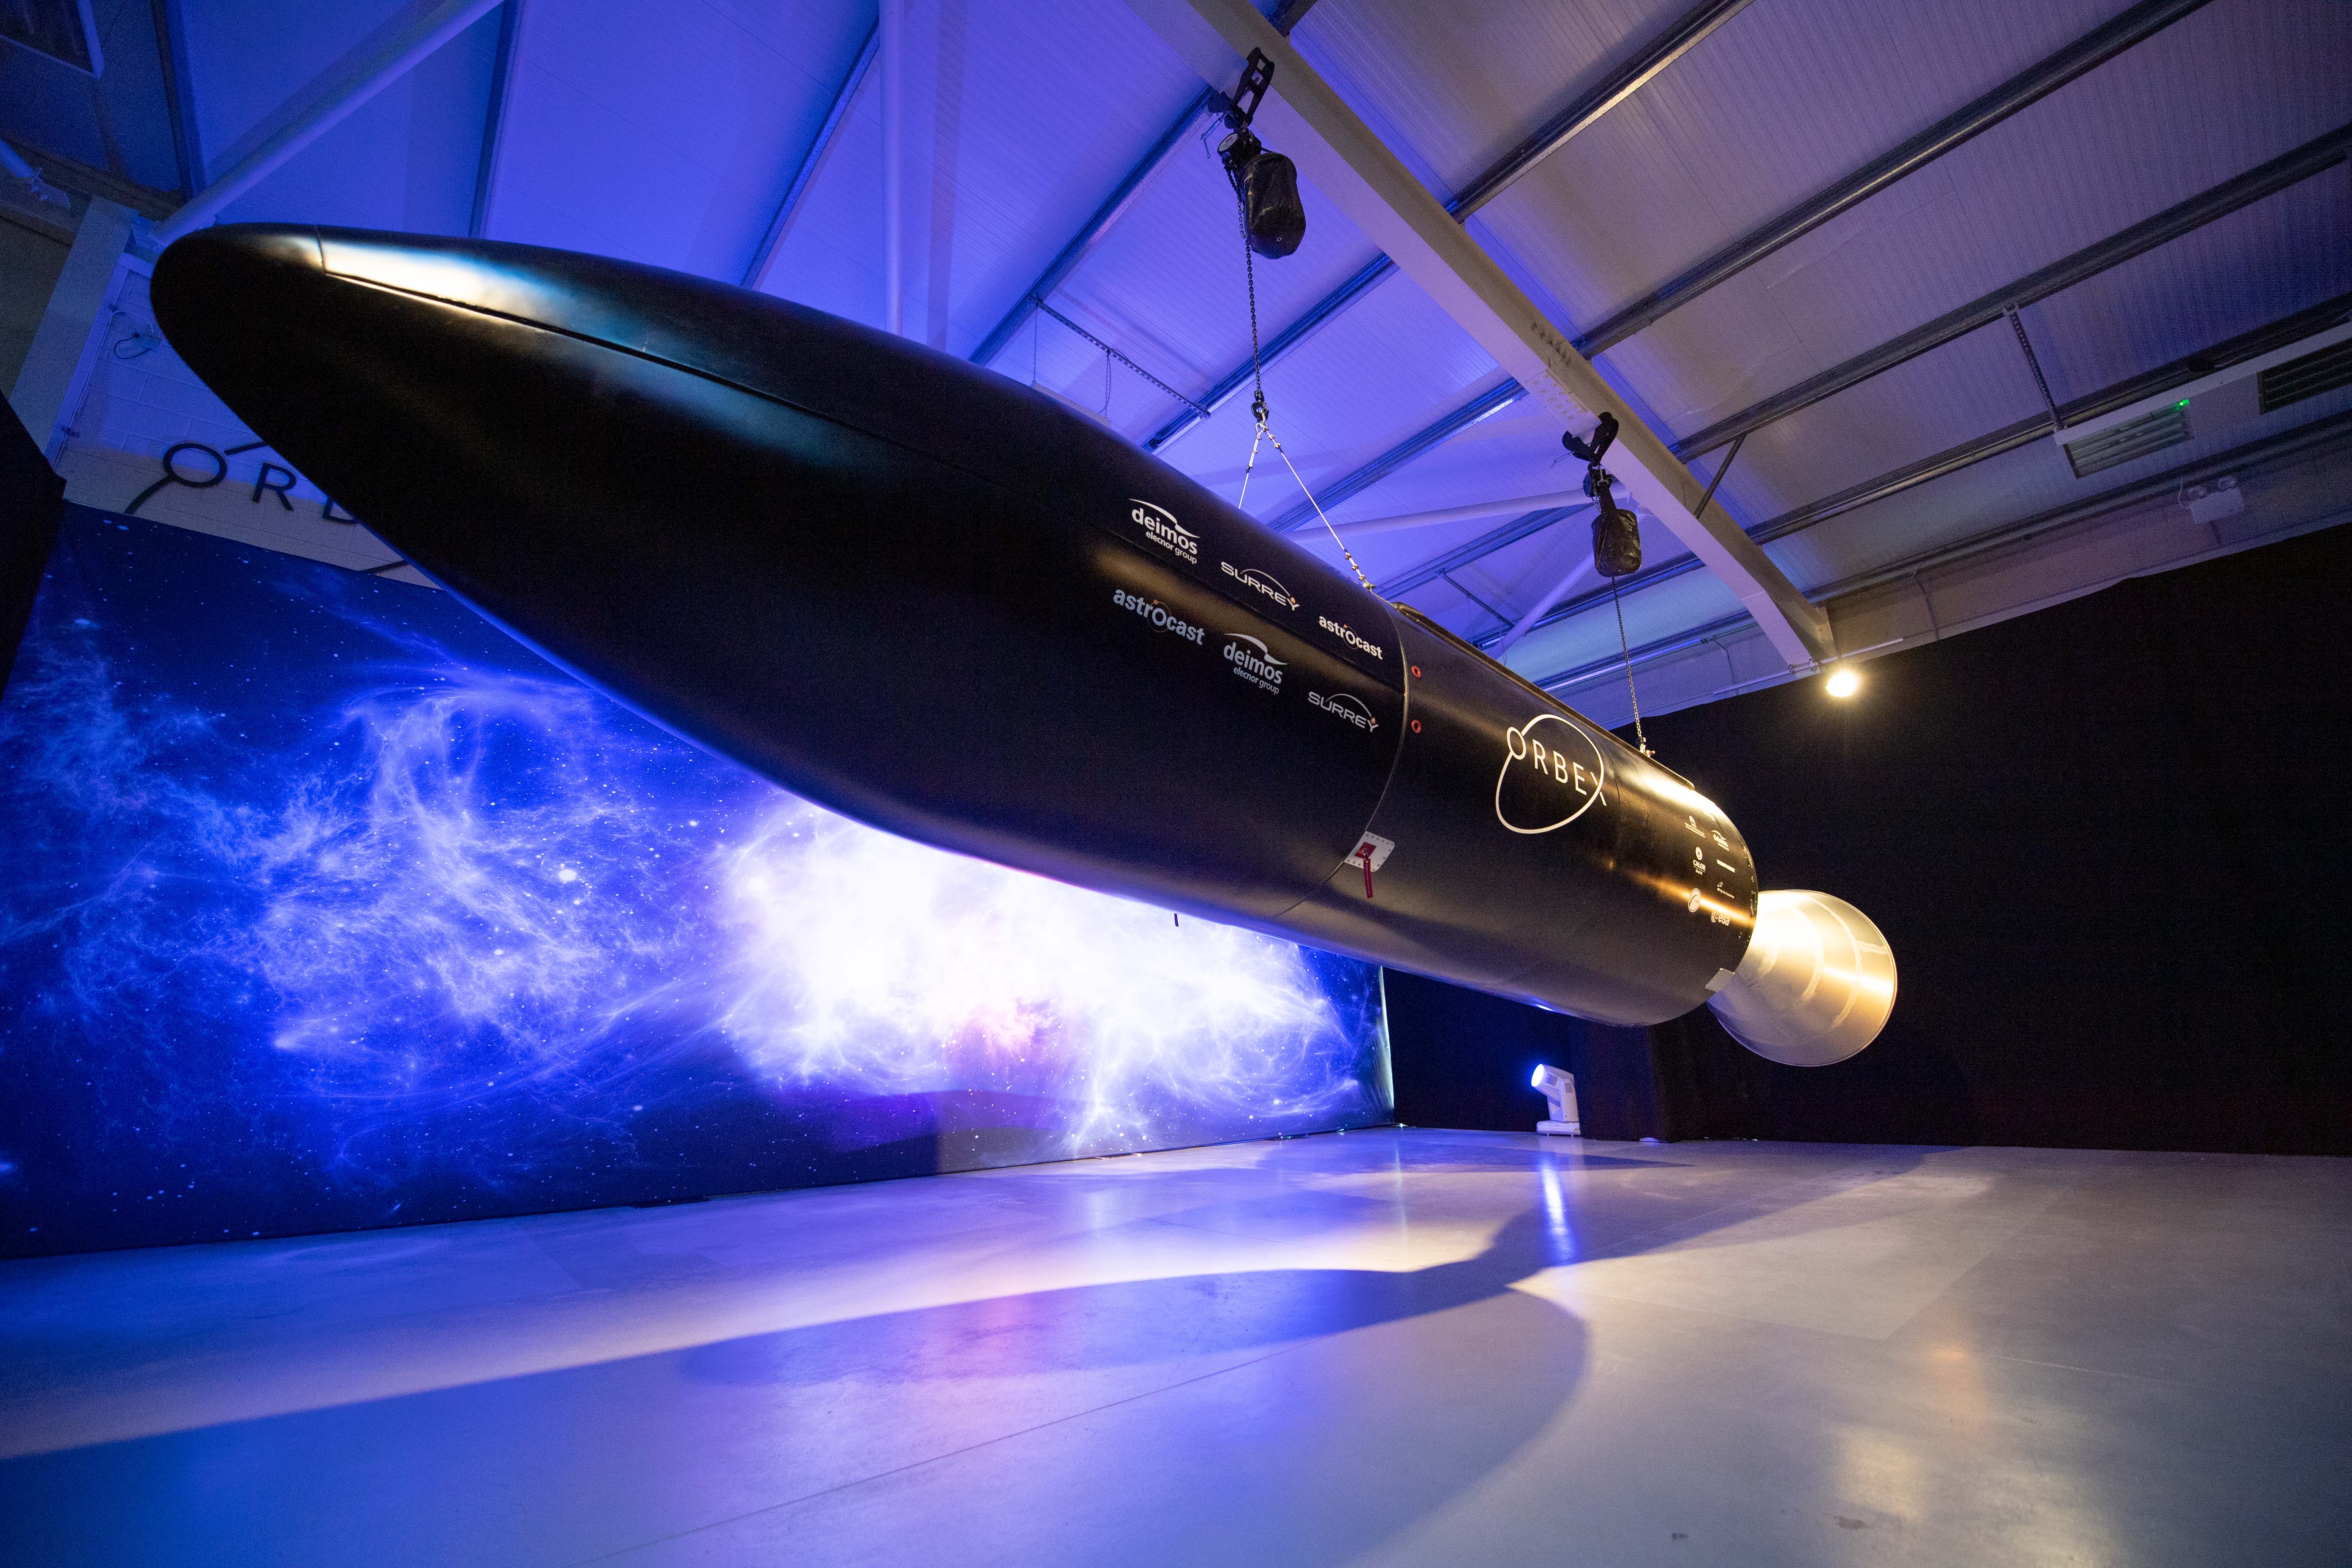 UK space launch company hopes to launch their Prime rocket from British soil.